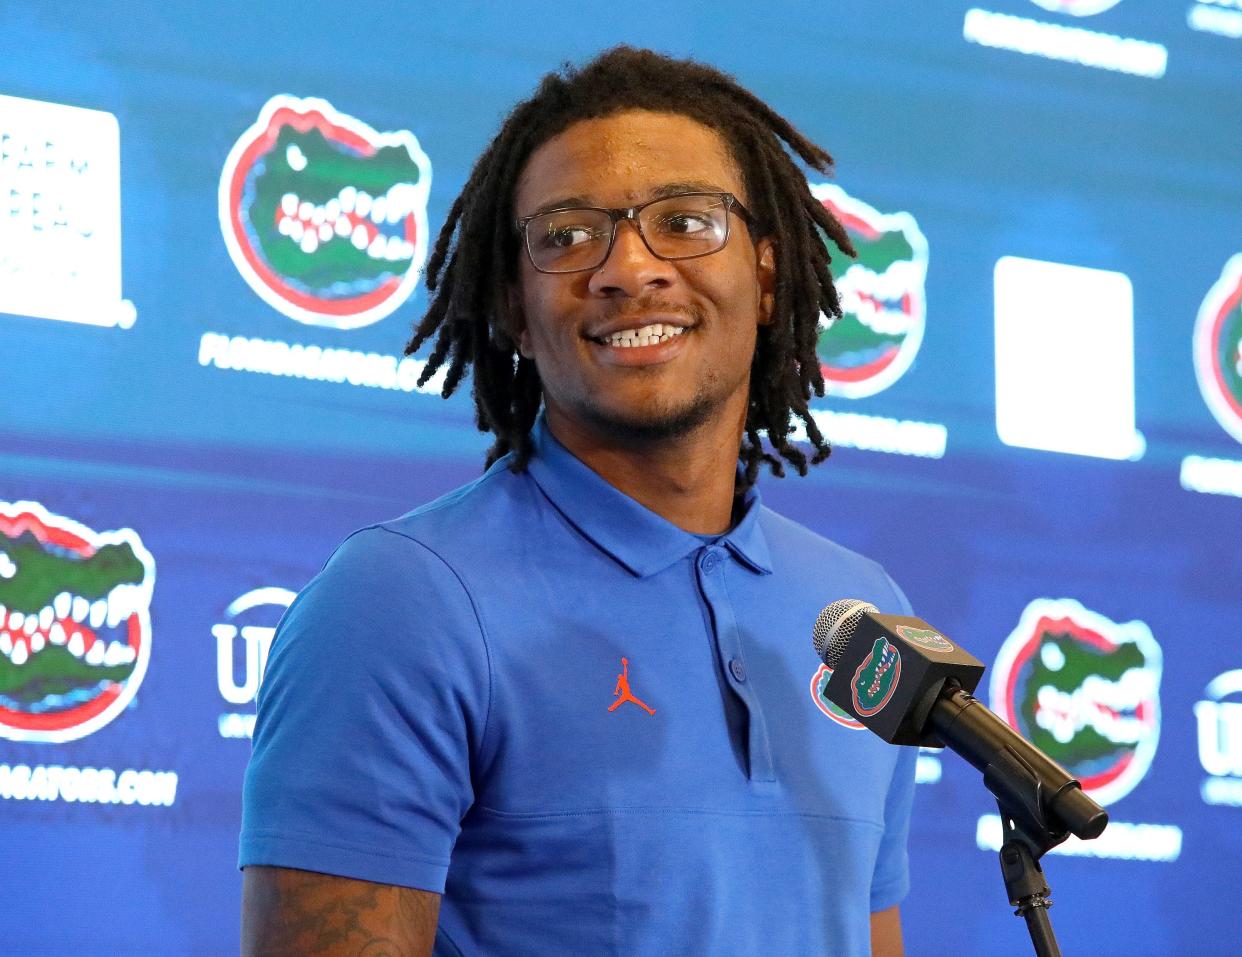 Florida quarterback Anthony Richardson, seen here answering questions from the media Wednesday at the Heavener Football Training Facility, gets his first start at The Swamp on Saturday against No. 7-ranked Utah.